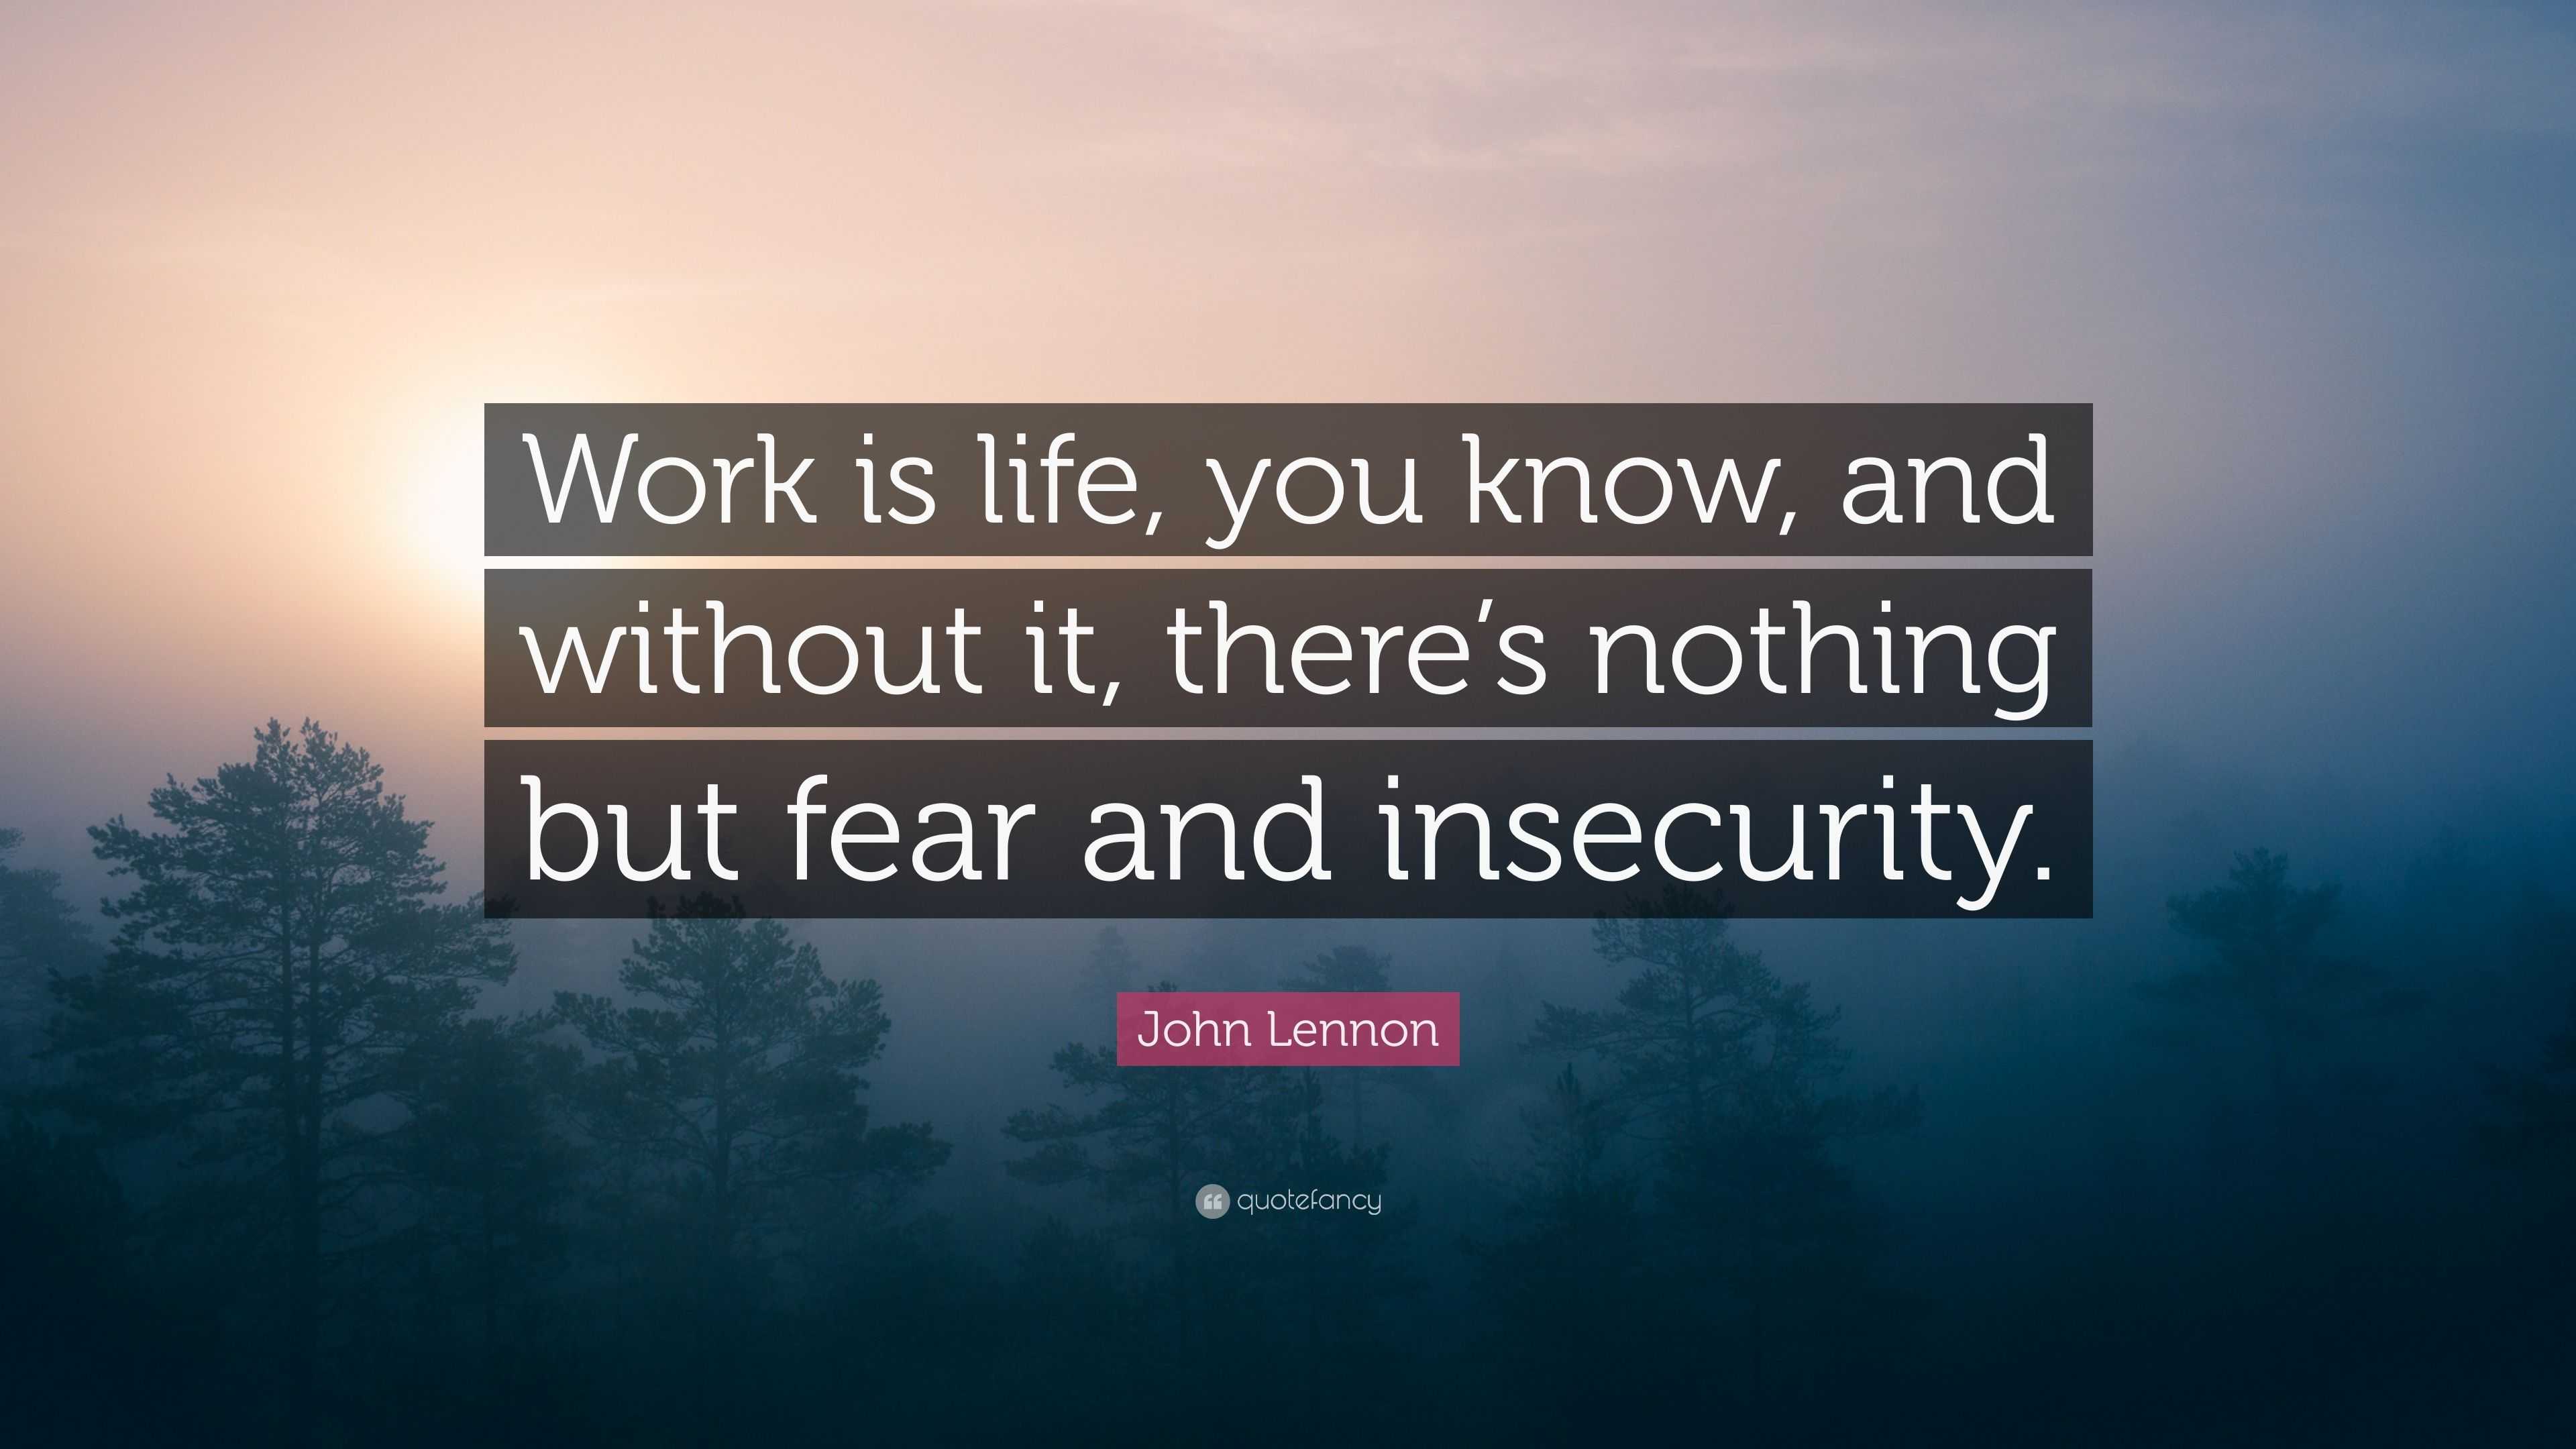 John Lennon Quote “Work is life you know and without it